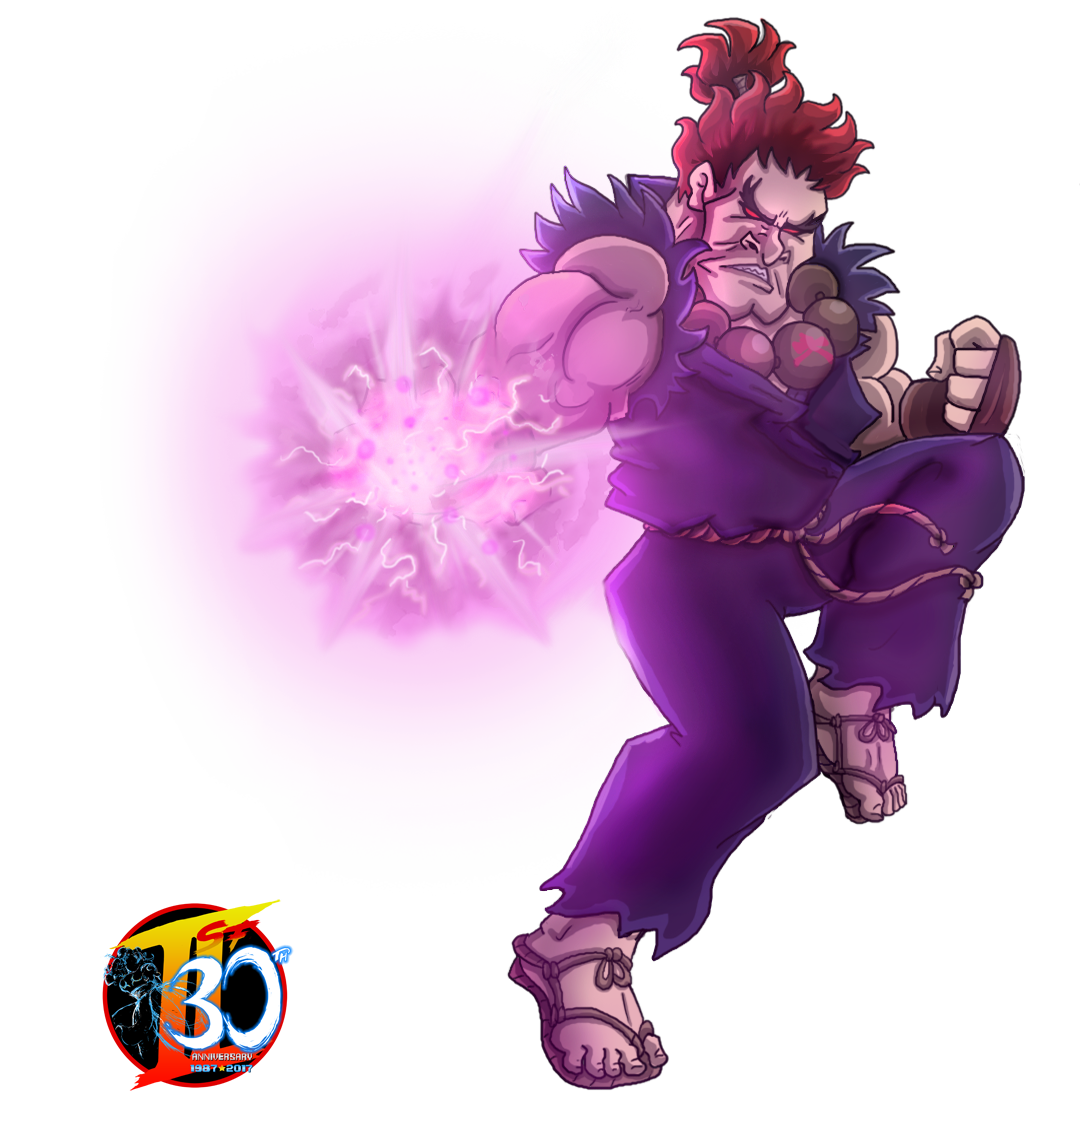 Akuma kicks off the S2 roster of Street Fighter V this month